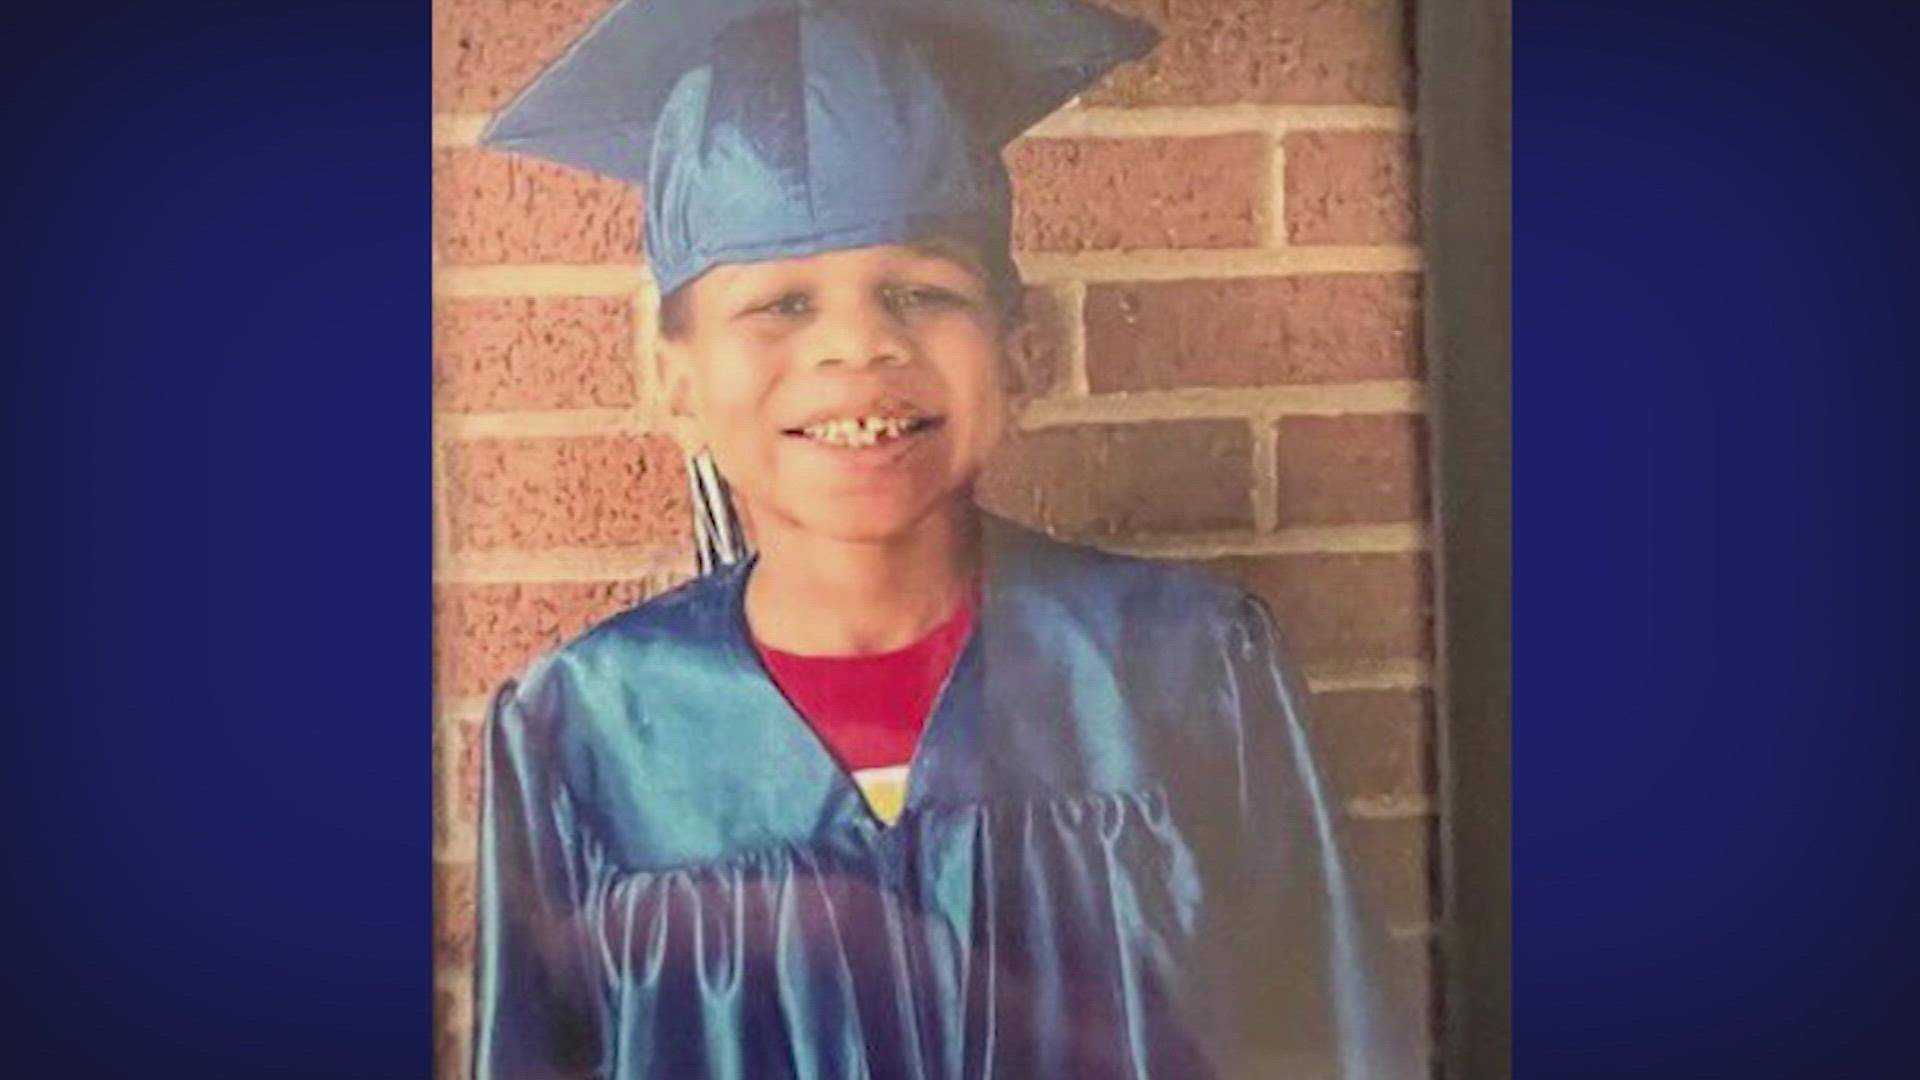 Troy Khoeler, 7, was found dead in a washing machine in his Spring home after his adoptive parents reported him missing earlier that morning.